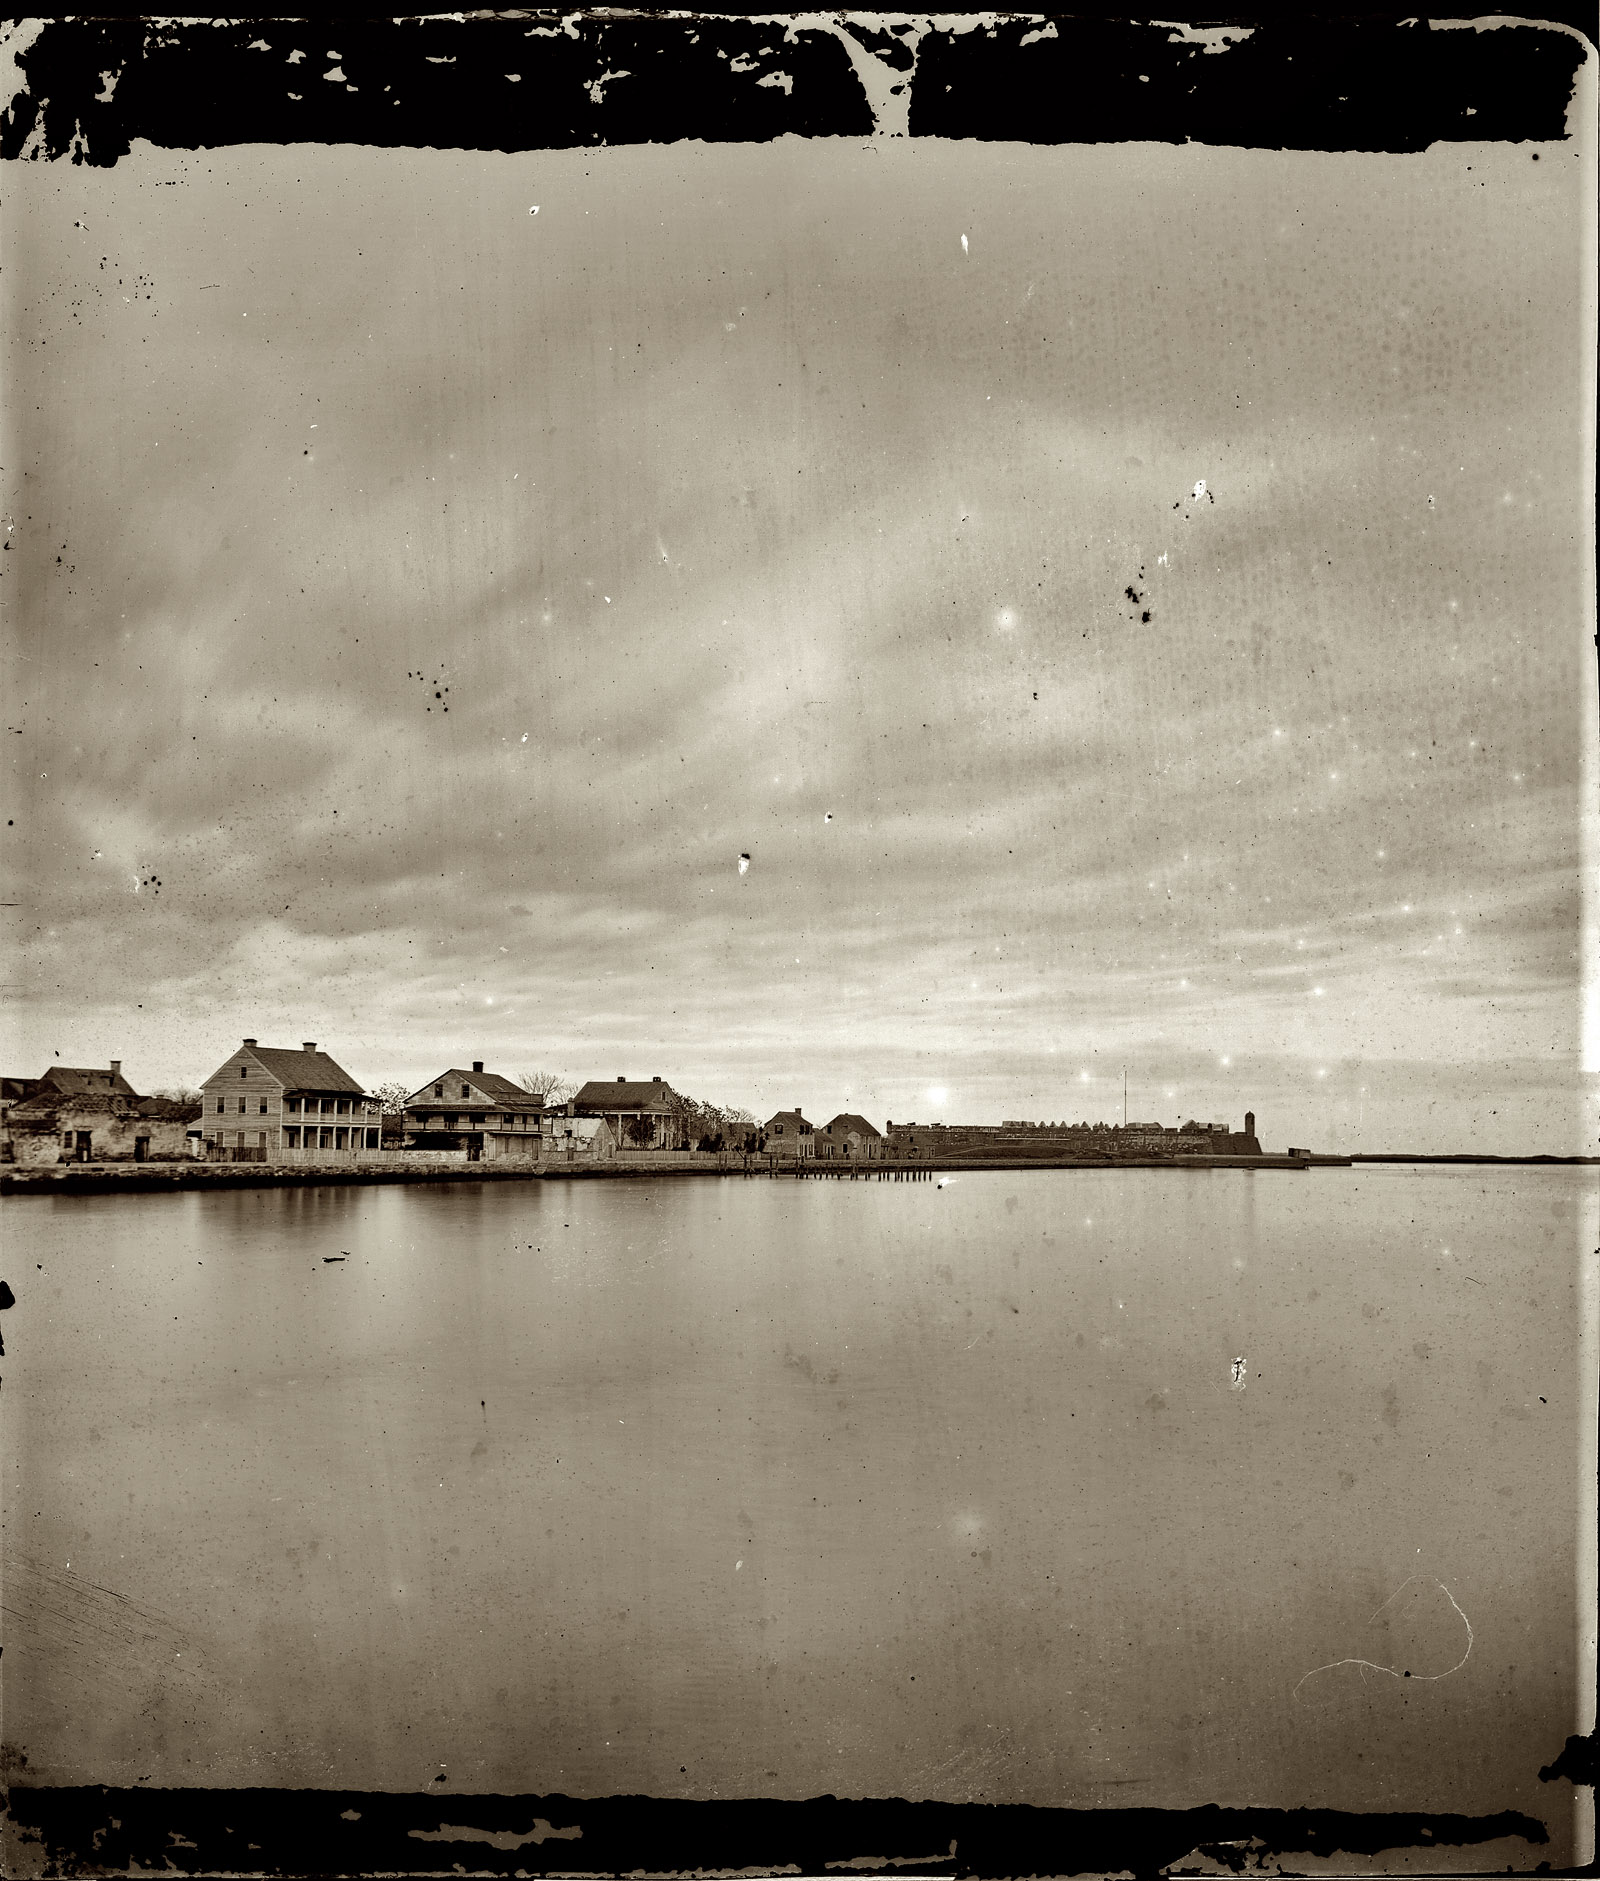 St. Augustine, Florida, circa 1865. "View of town from bay." View full size. Wet-plate glass negative, left half of stereo pair, by Samuel A. Cooley.